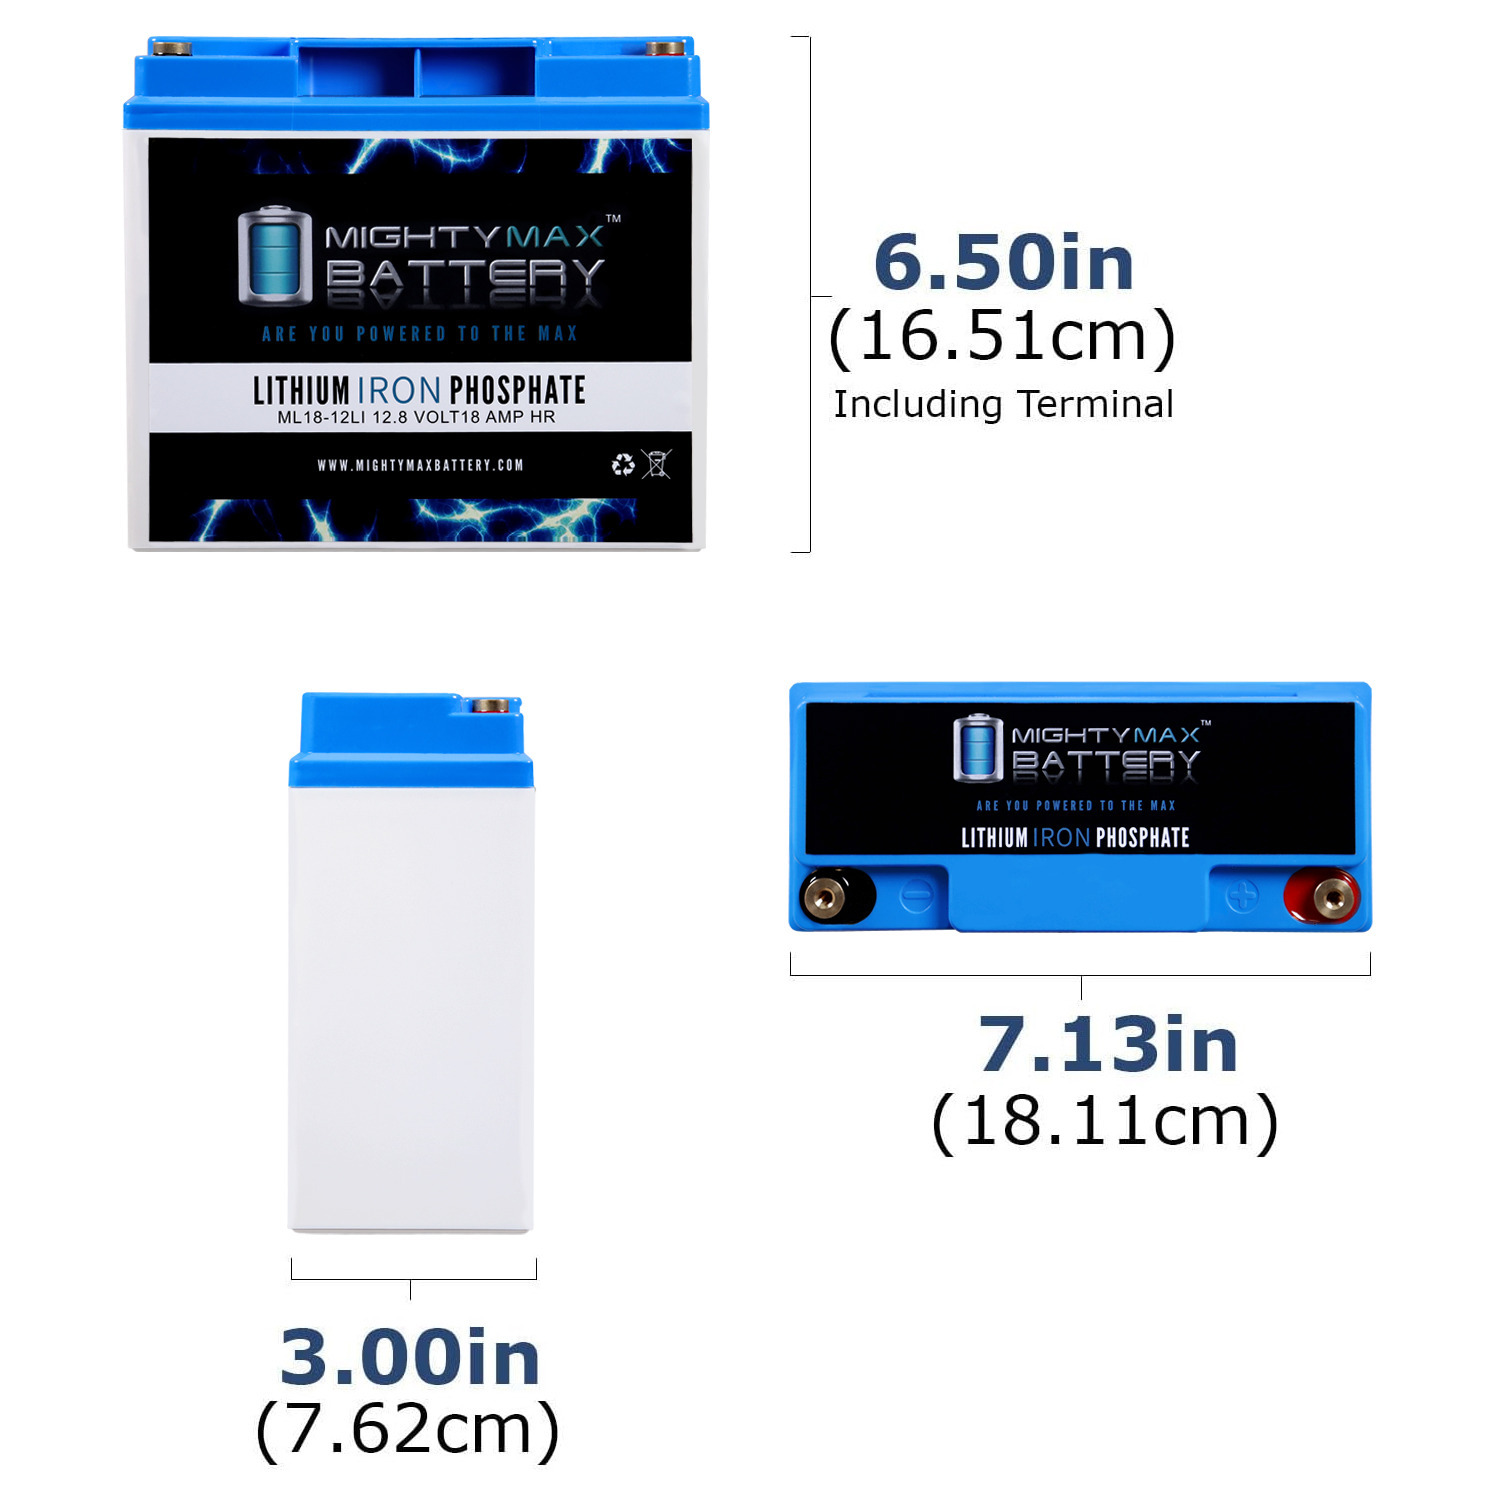 12V 18Ah LiFePO4 Battery  Himax Professional Manufacturer of LiFePO4